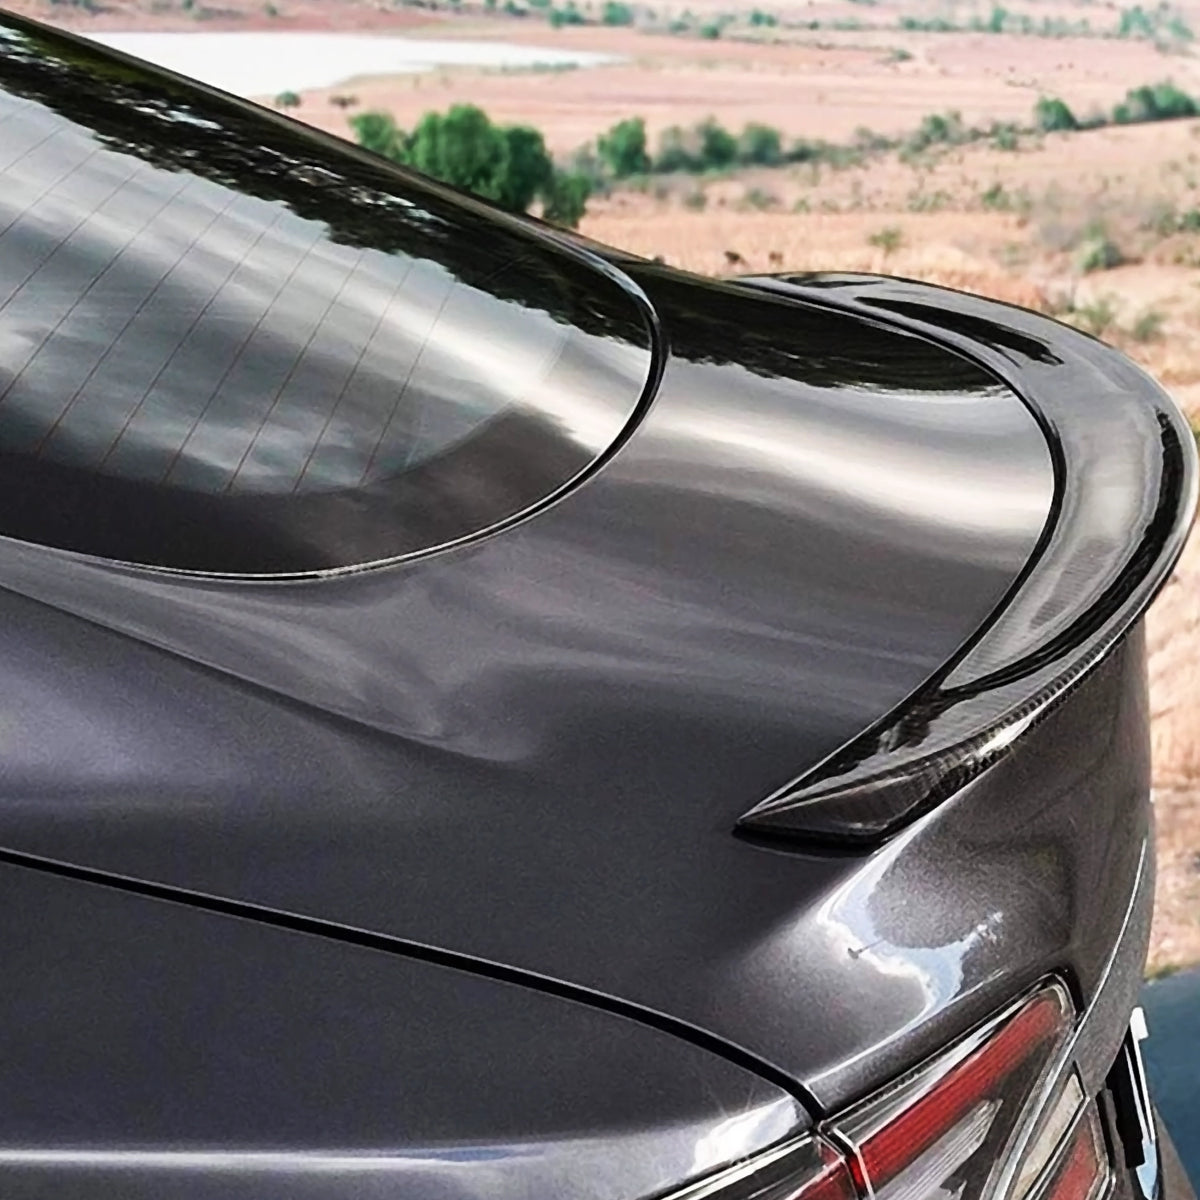 Adreama Tesla Model S Performance Spoiler Made With Real Premium Carbon Fiber - Glossy Finish